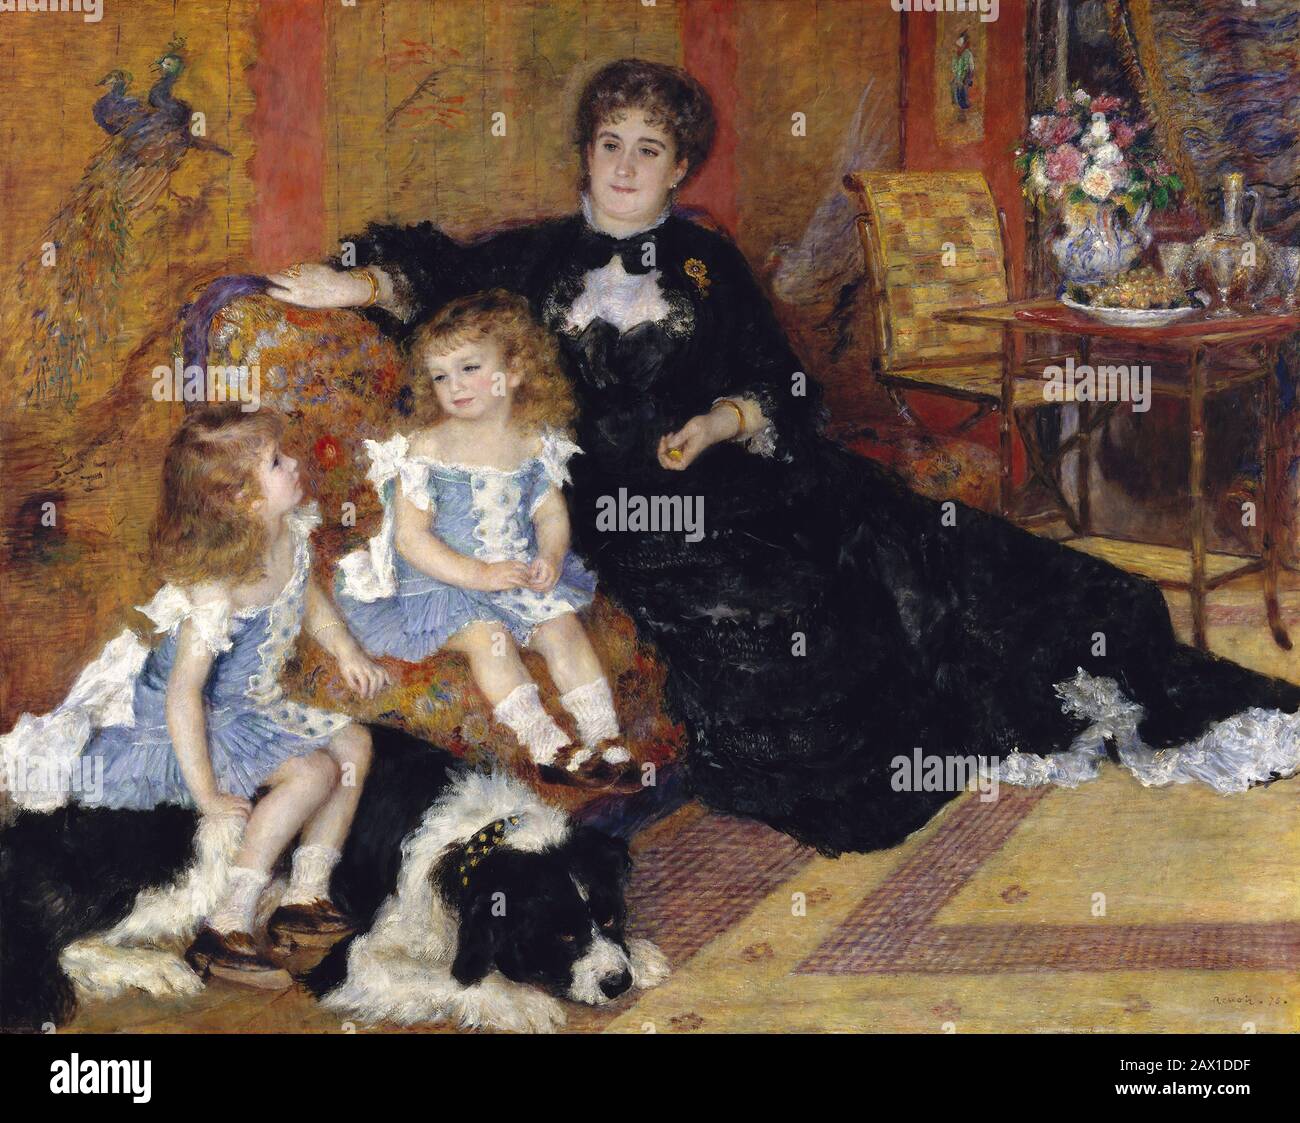 Madame Georges Charpentier (Margu&#xe9;rite-Louise Lemonnier, 1848-1904) and Her Children, Georgette-Berthe (1872-1945) and Paul-&#xc9;mile-Charles (1875-1895), 1878. Stock Photo